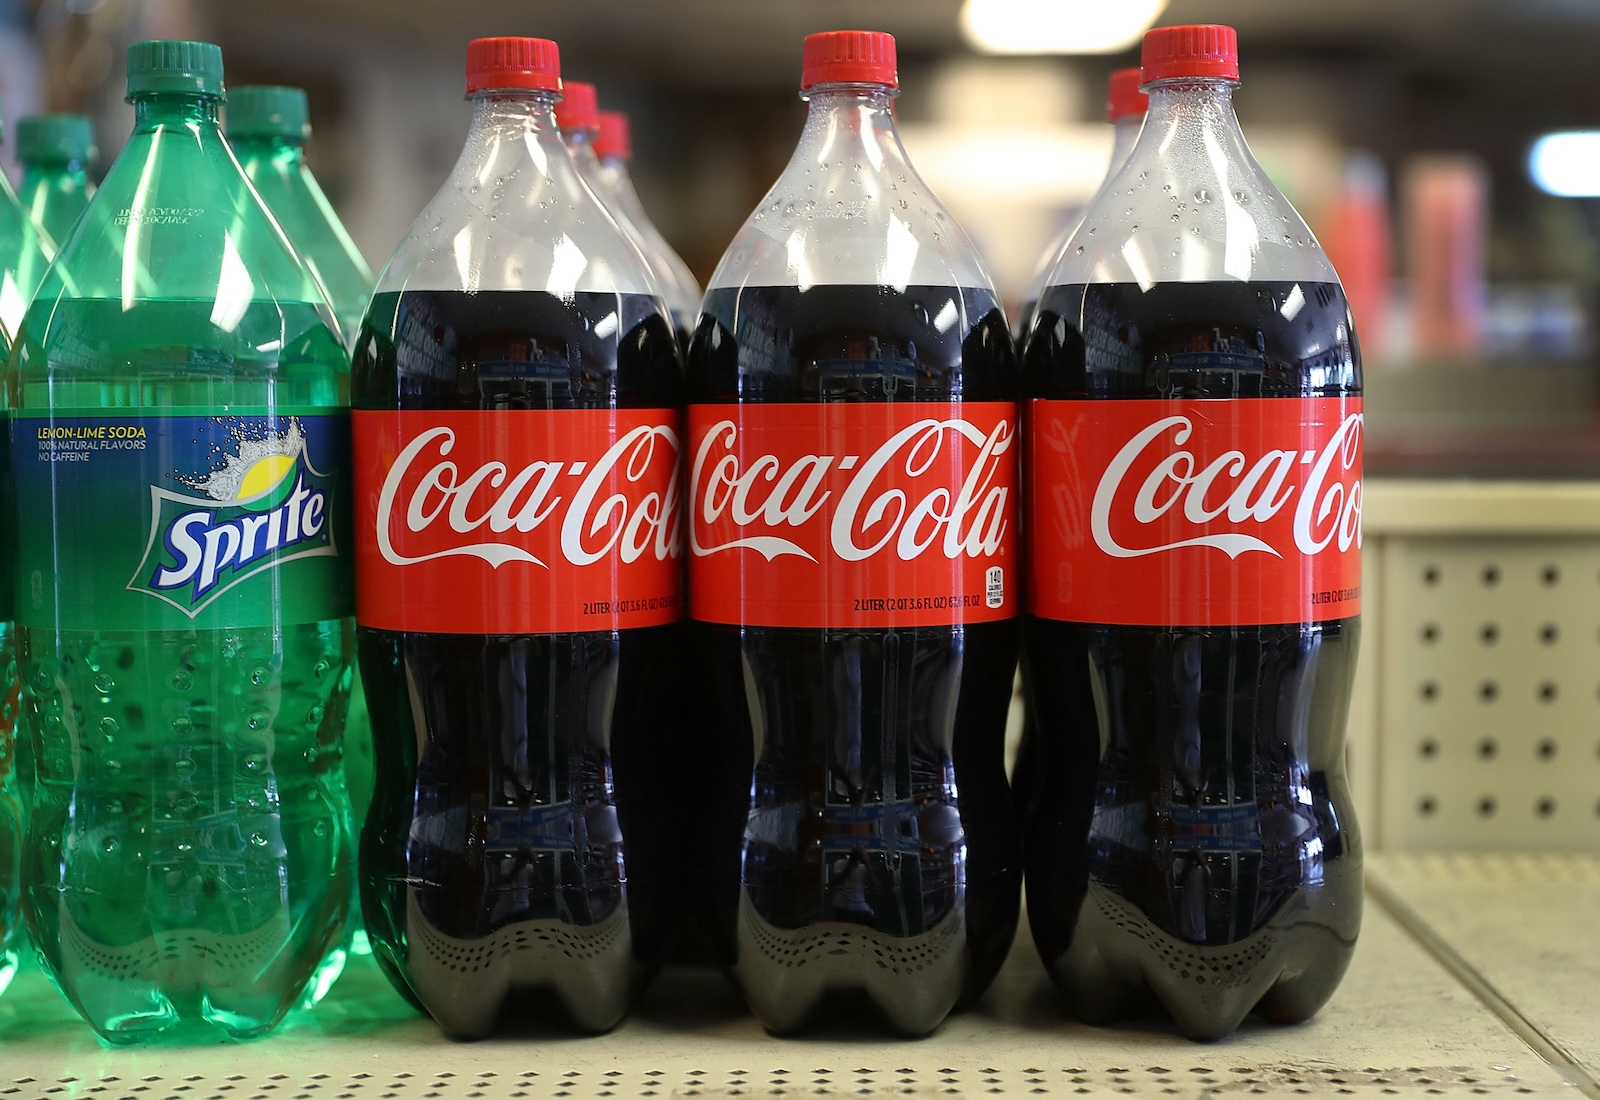 Bottles of Coca-Cola are lined up on a shelf. To the left are large bottles of Sprite.